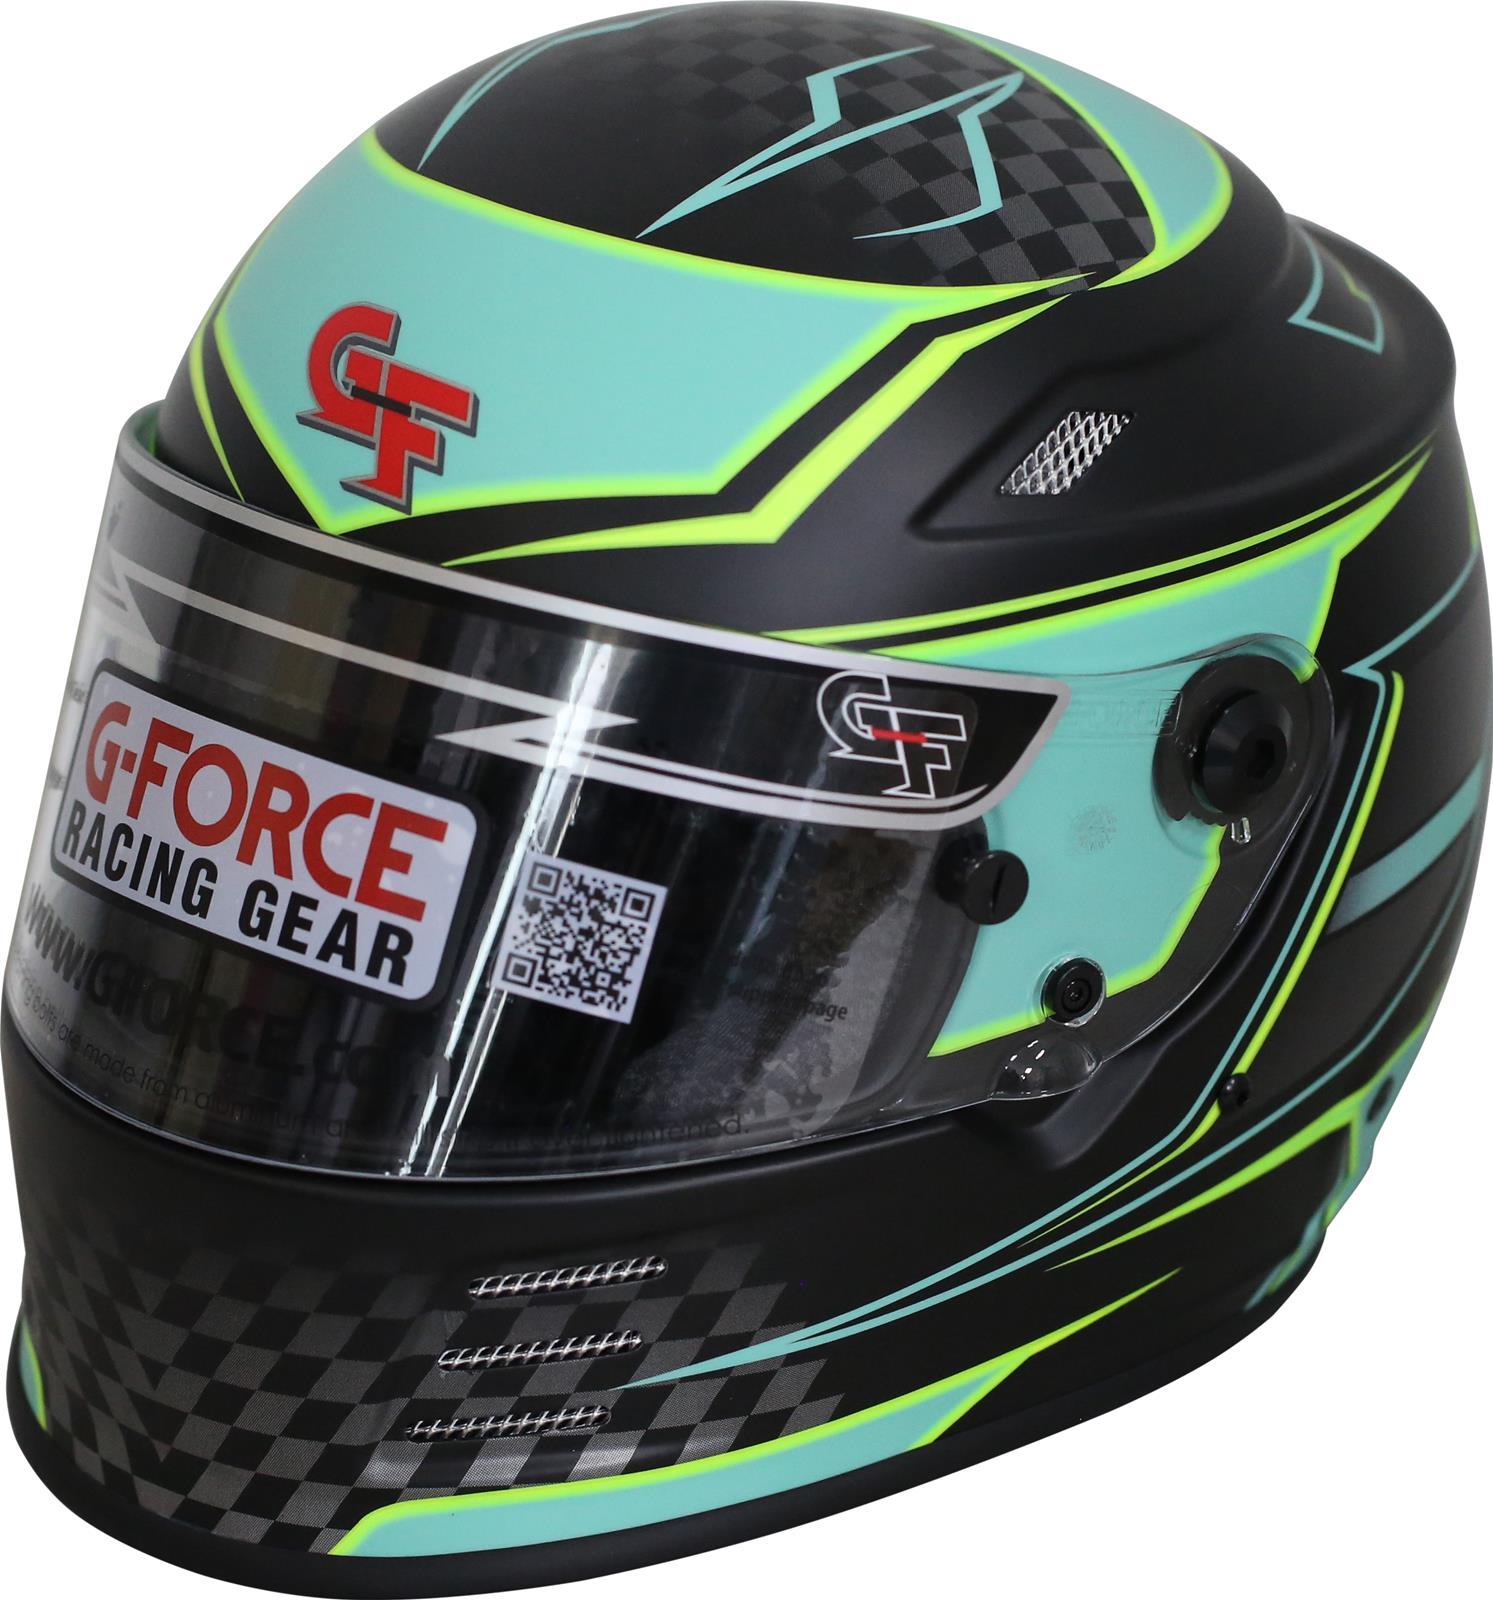 G-Force Racing Gear 13005LRGTL Helmet, Revo Graphics, Full Face, Snell SA2020, Head and Neck Support Ready, Black / Teal, Large, Each